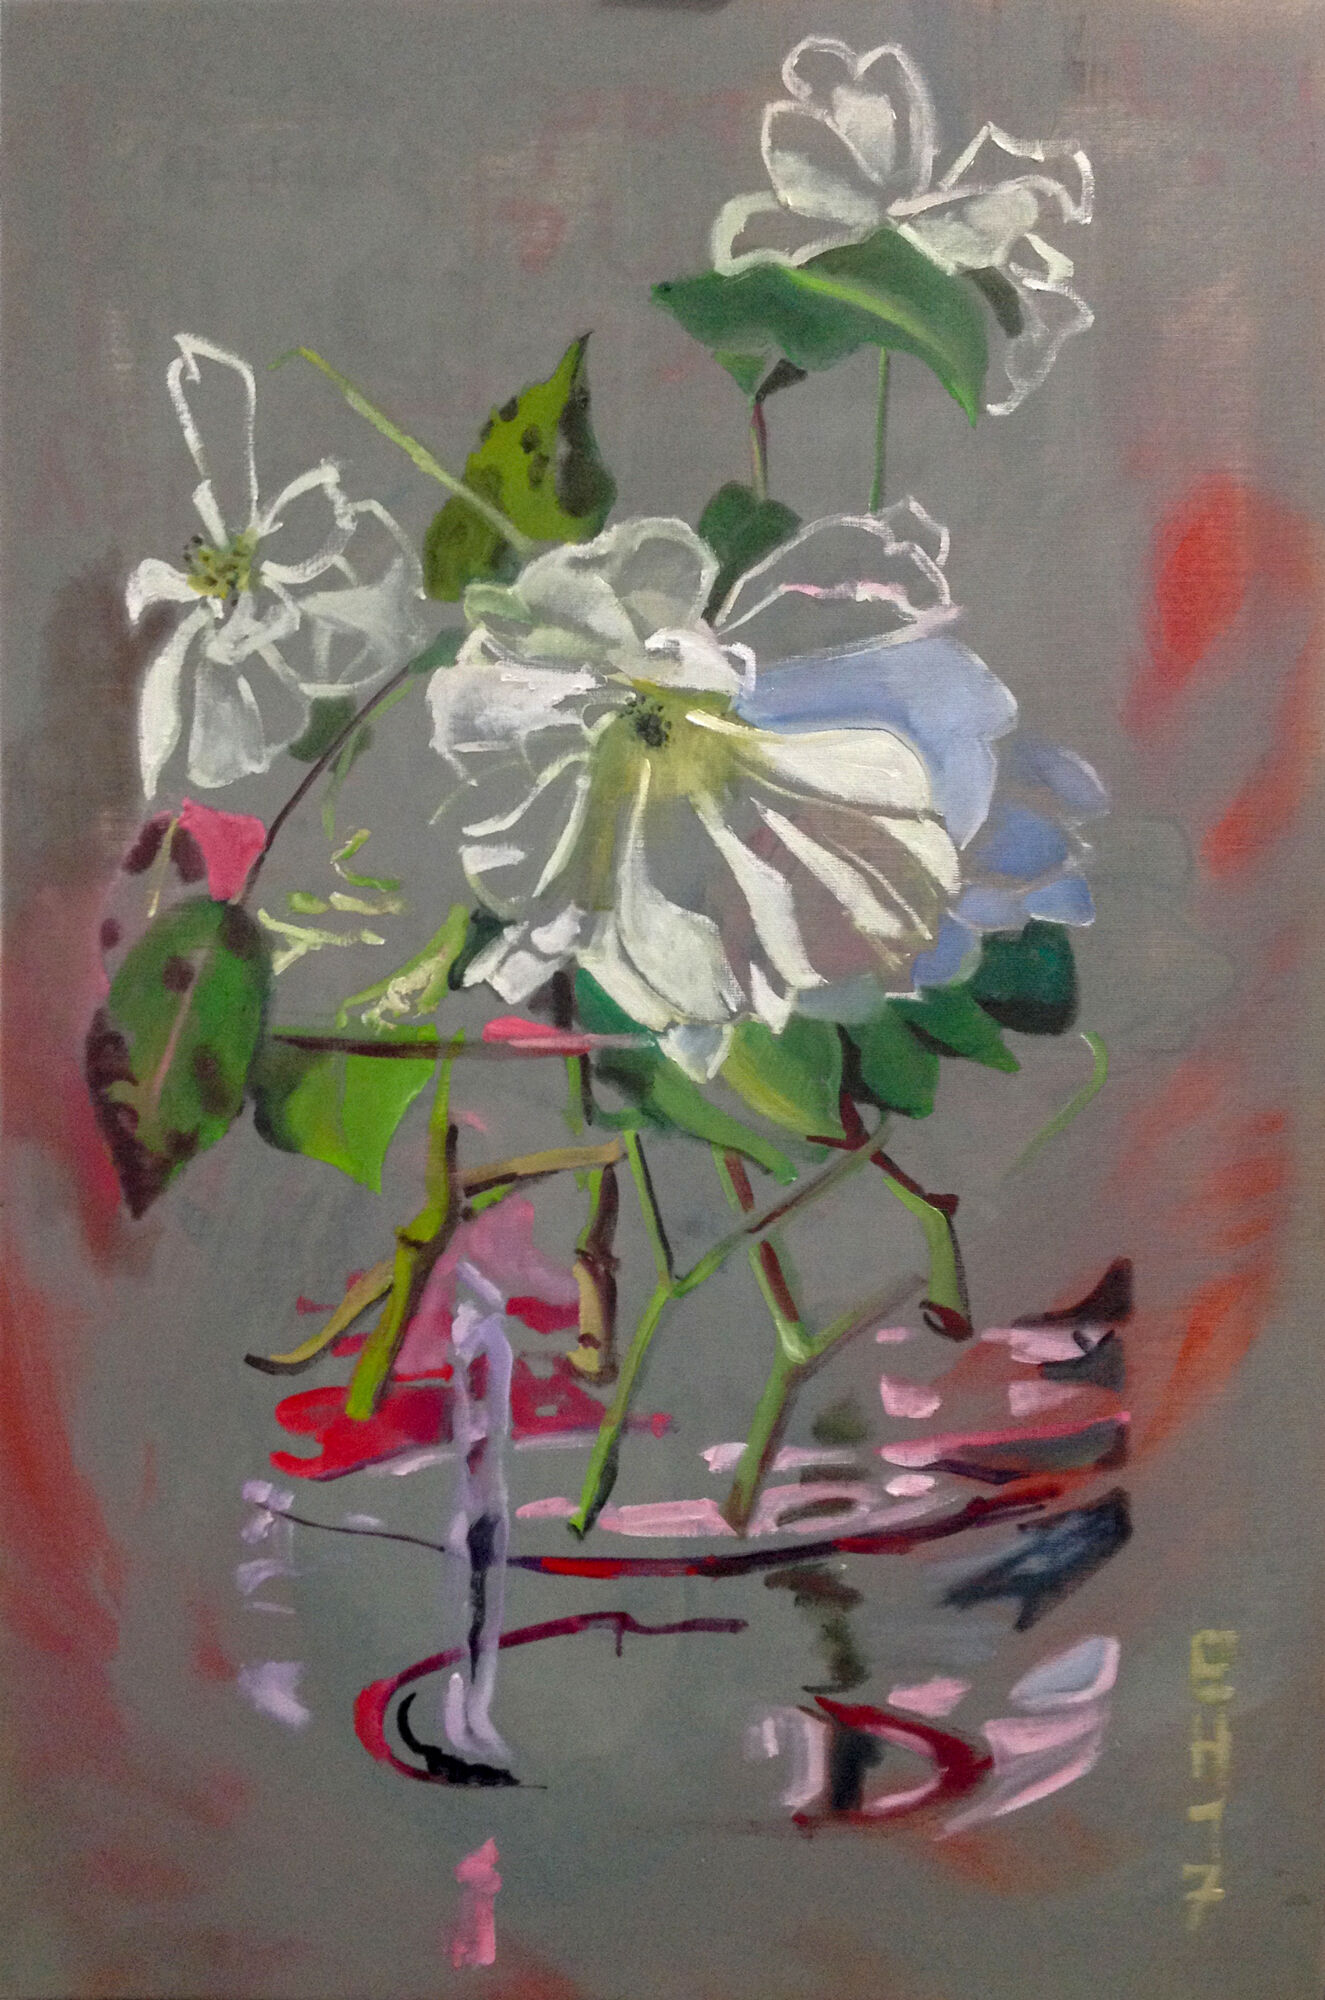 Picture "Novemberrose II" (2017) (Unique piece) by Evelyn Höfs